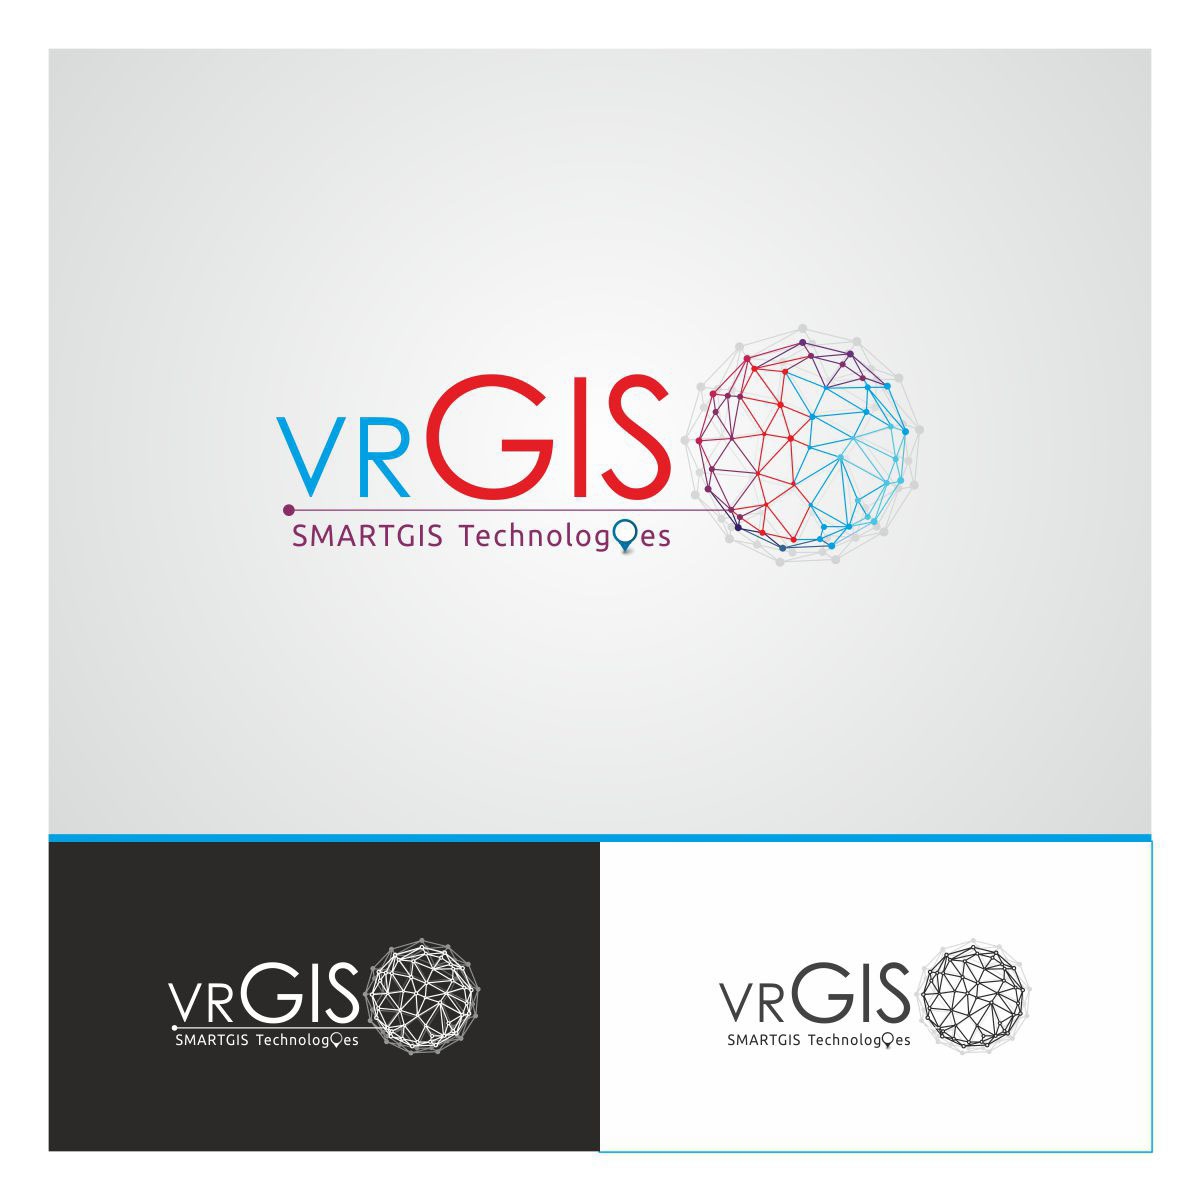 VR Geographic Information systems